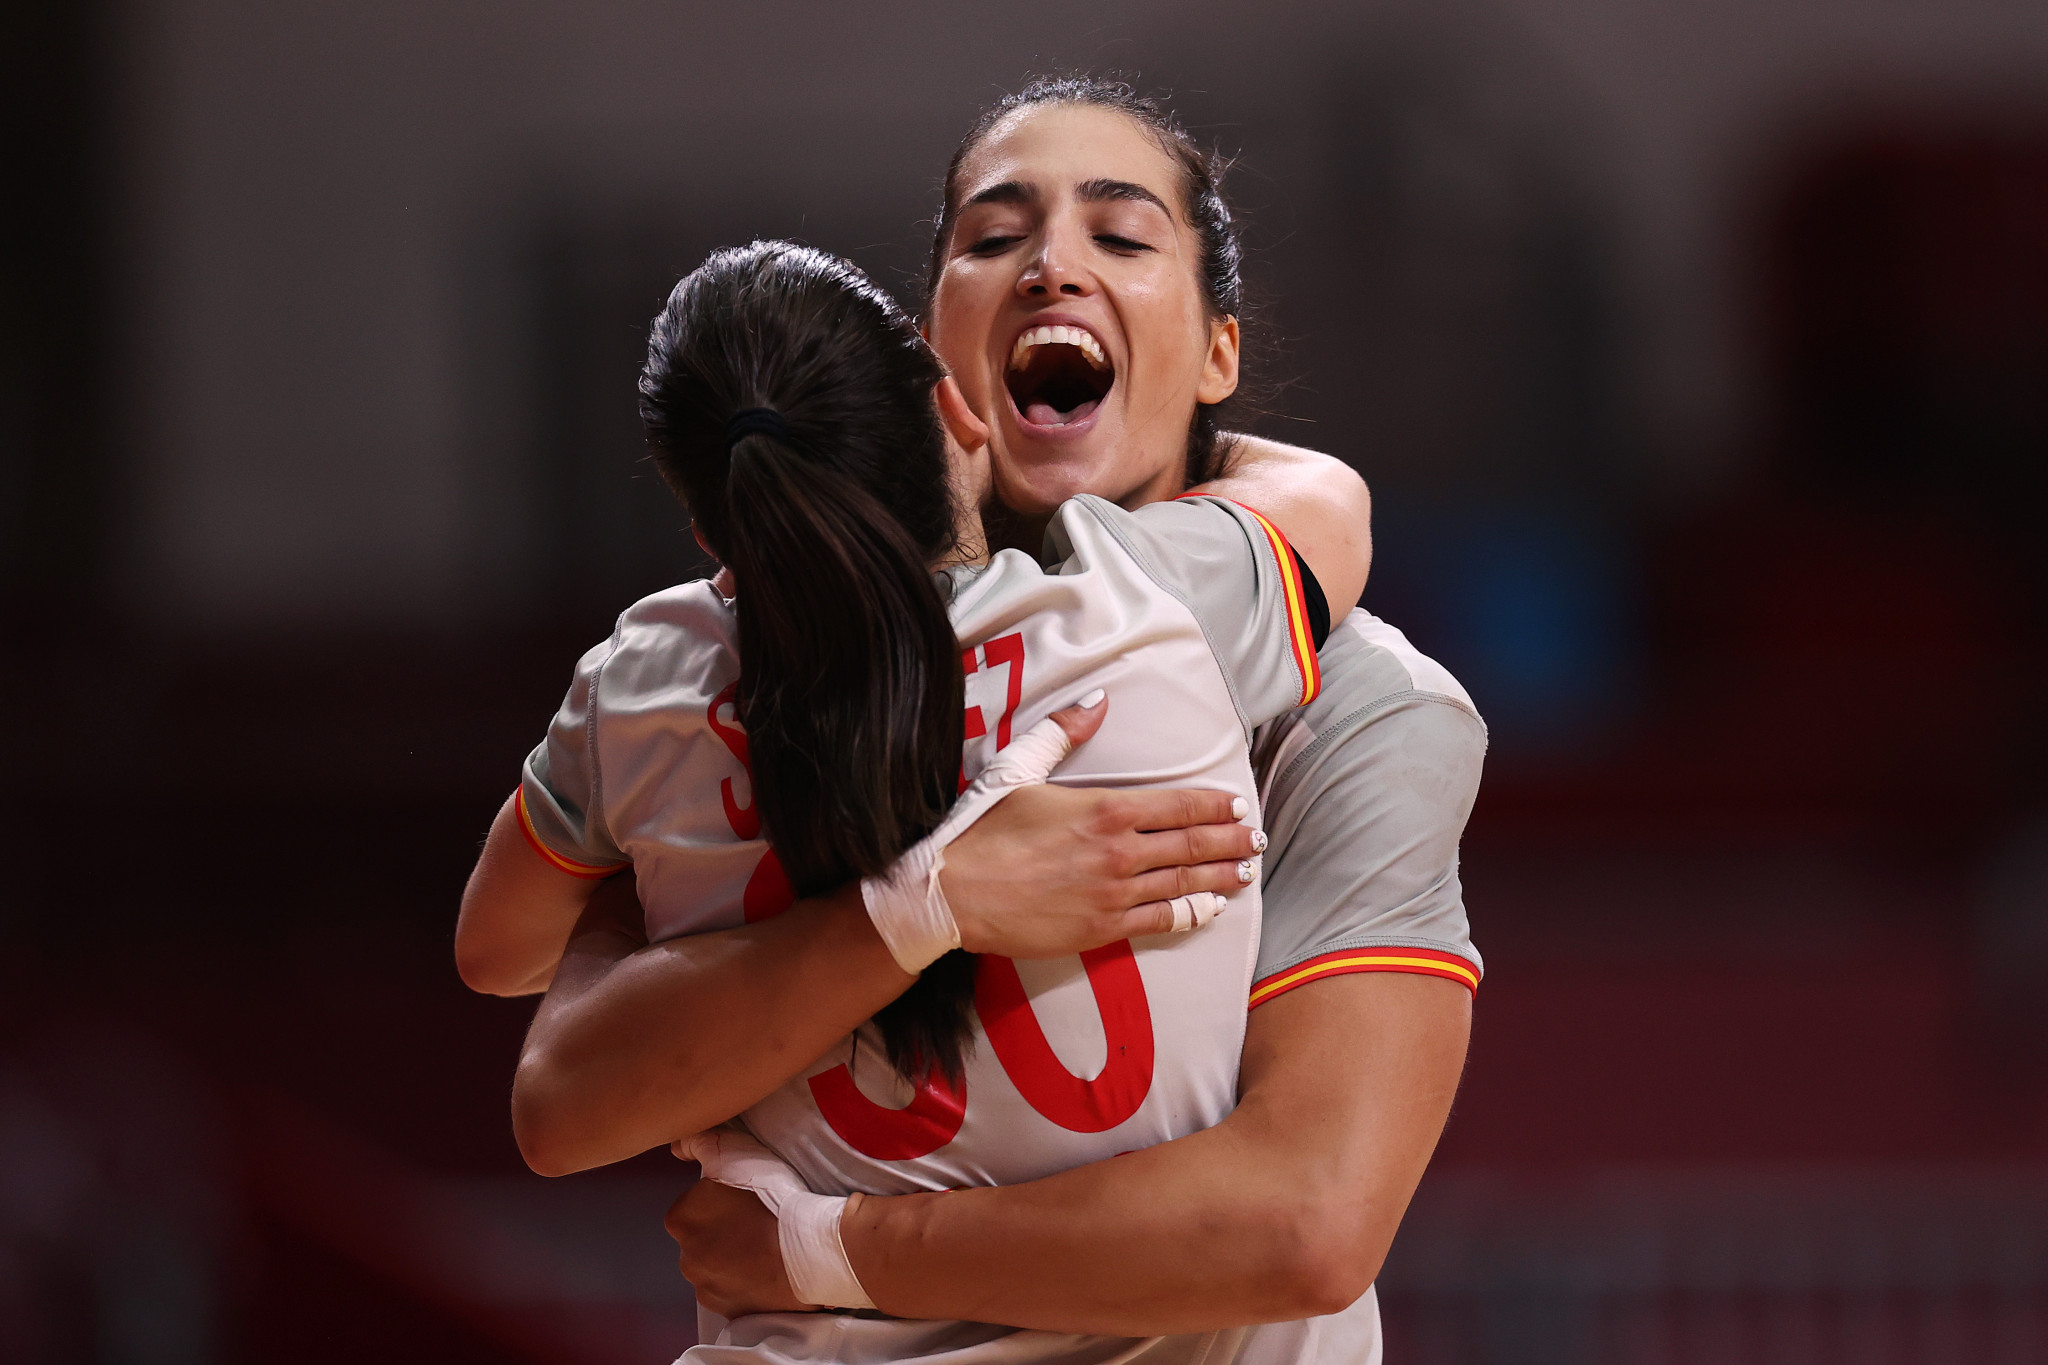 Spain aiming for redemption on home soil at IHF Women's Handball World Championship